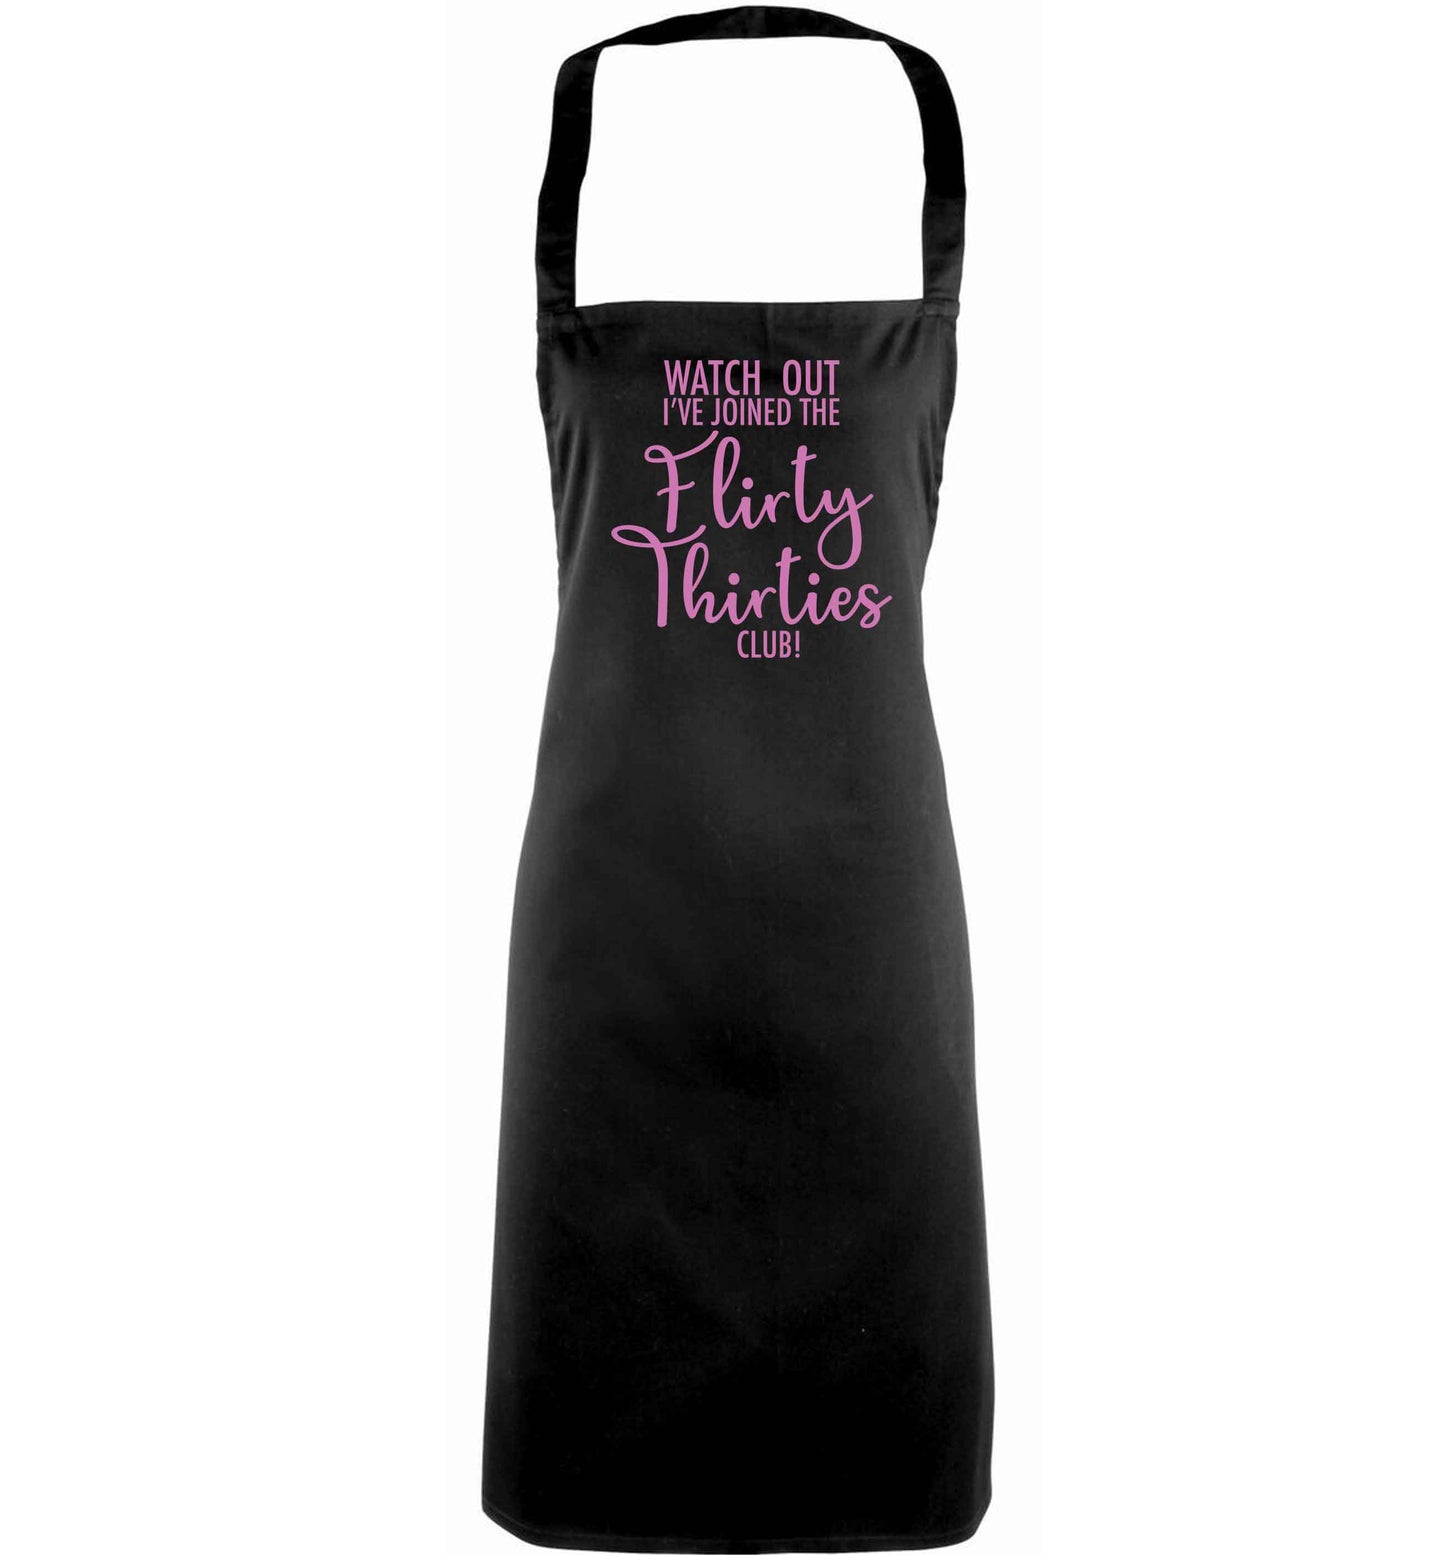 Watch out I've joined the flirty thirties club adults black apron